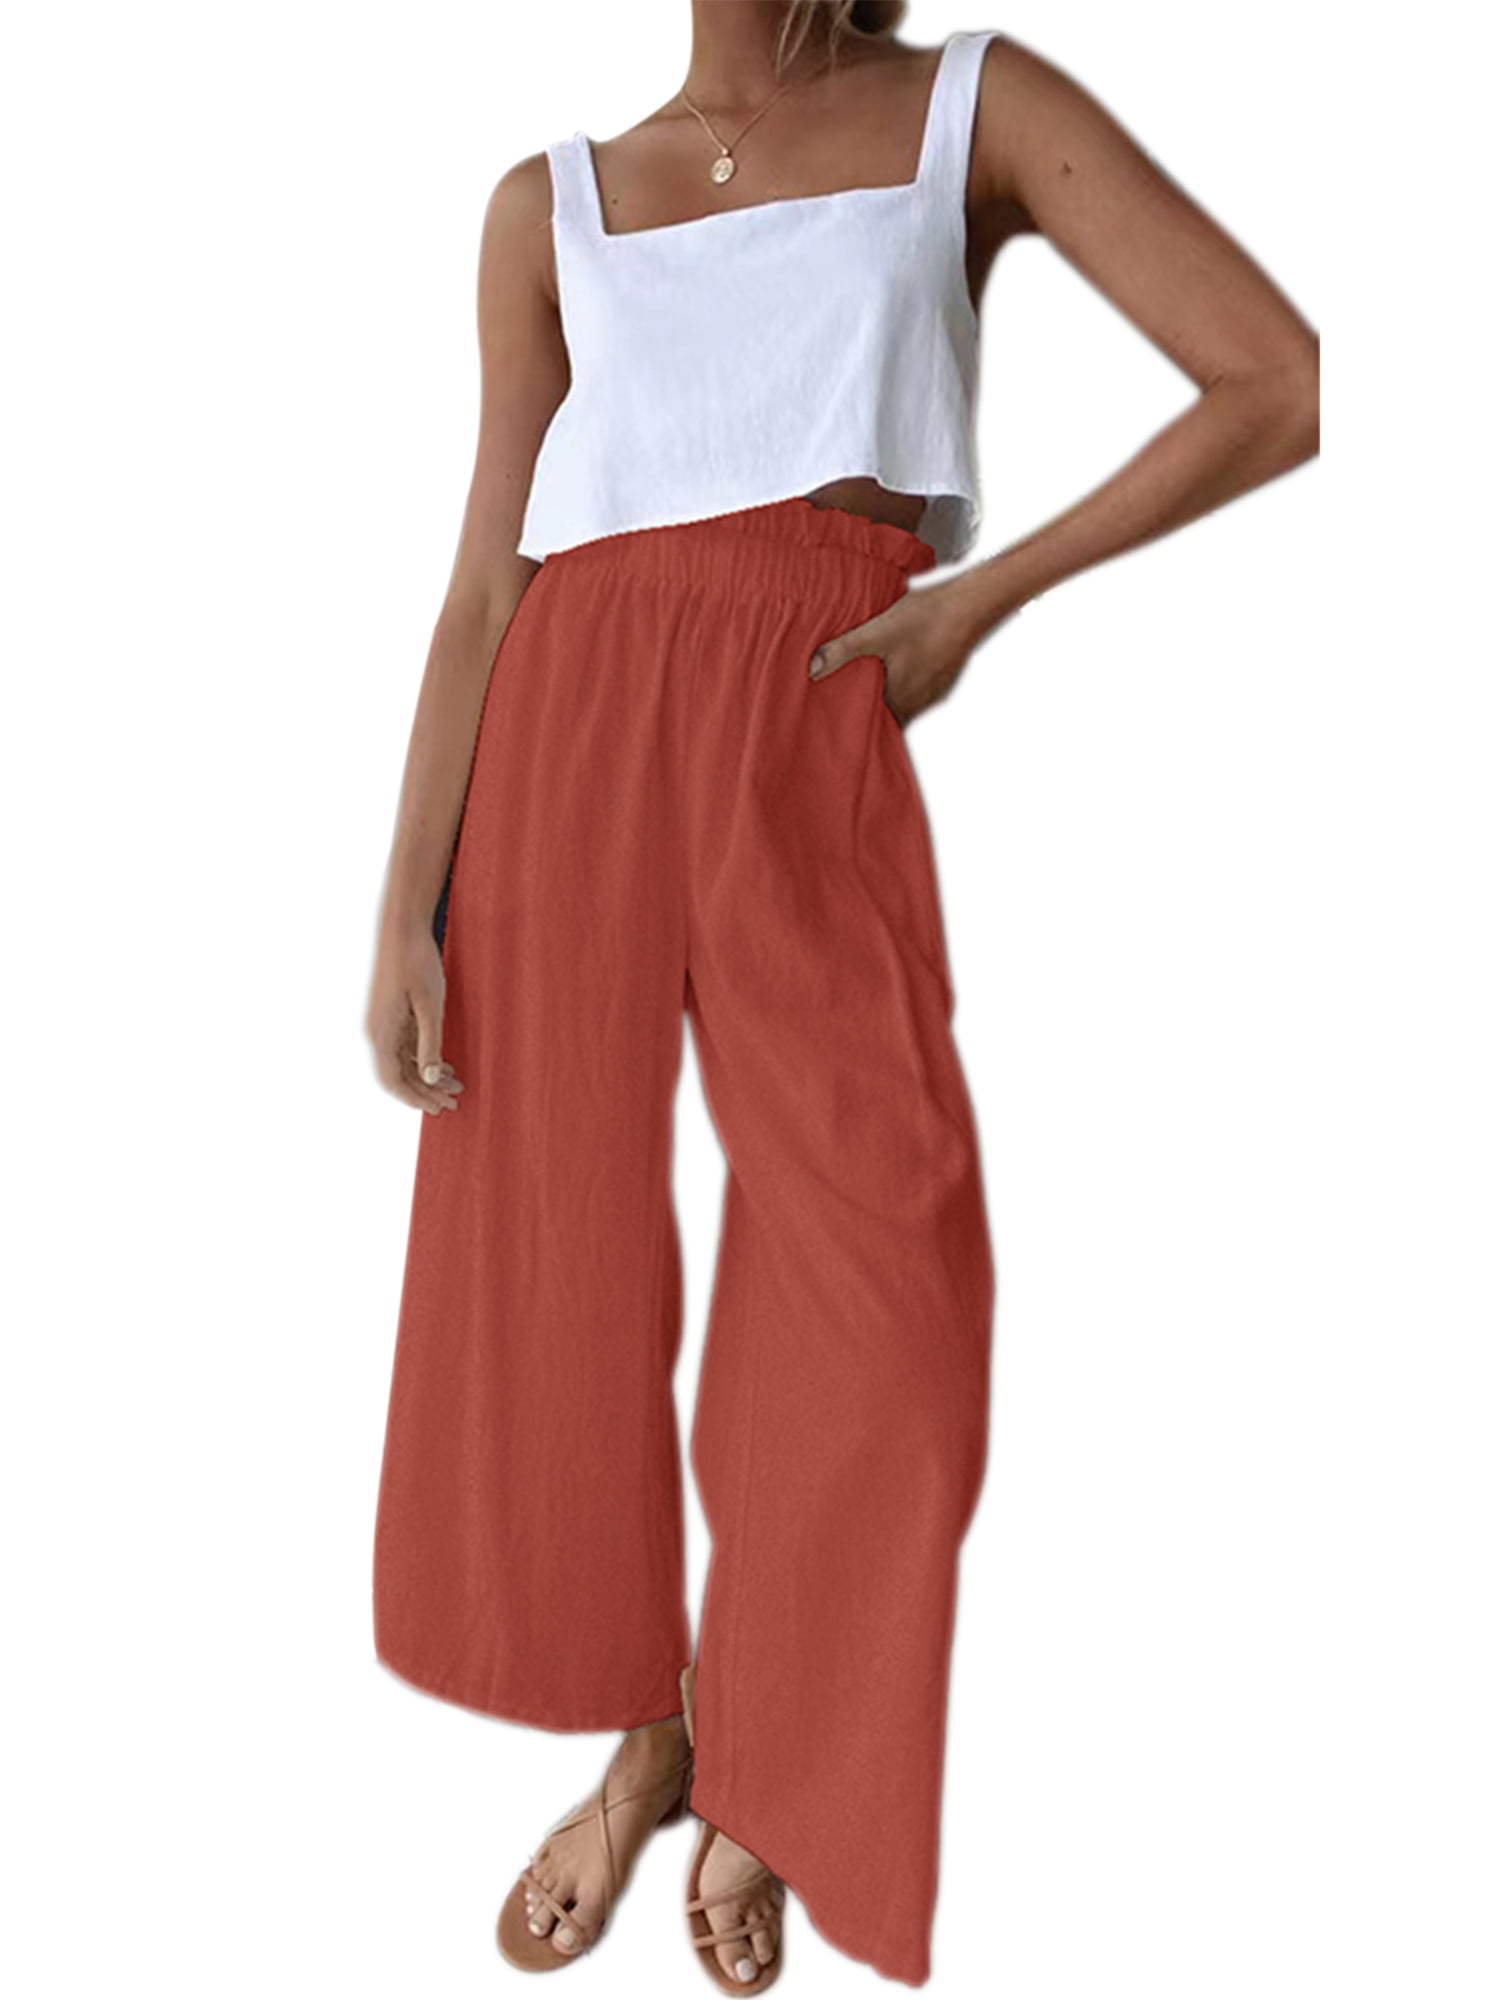 xkwyshop Women High Waist Casual Wide Leg Long Palazzo Pants Stretchy  Trousers with Pockets Brick Red L - Walmart.com